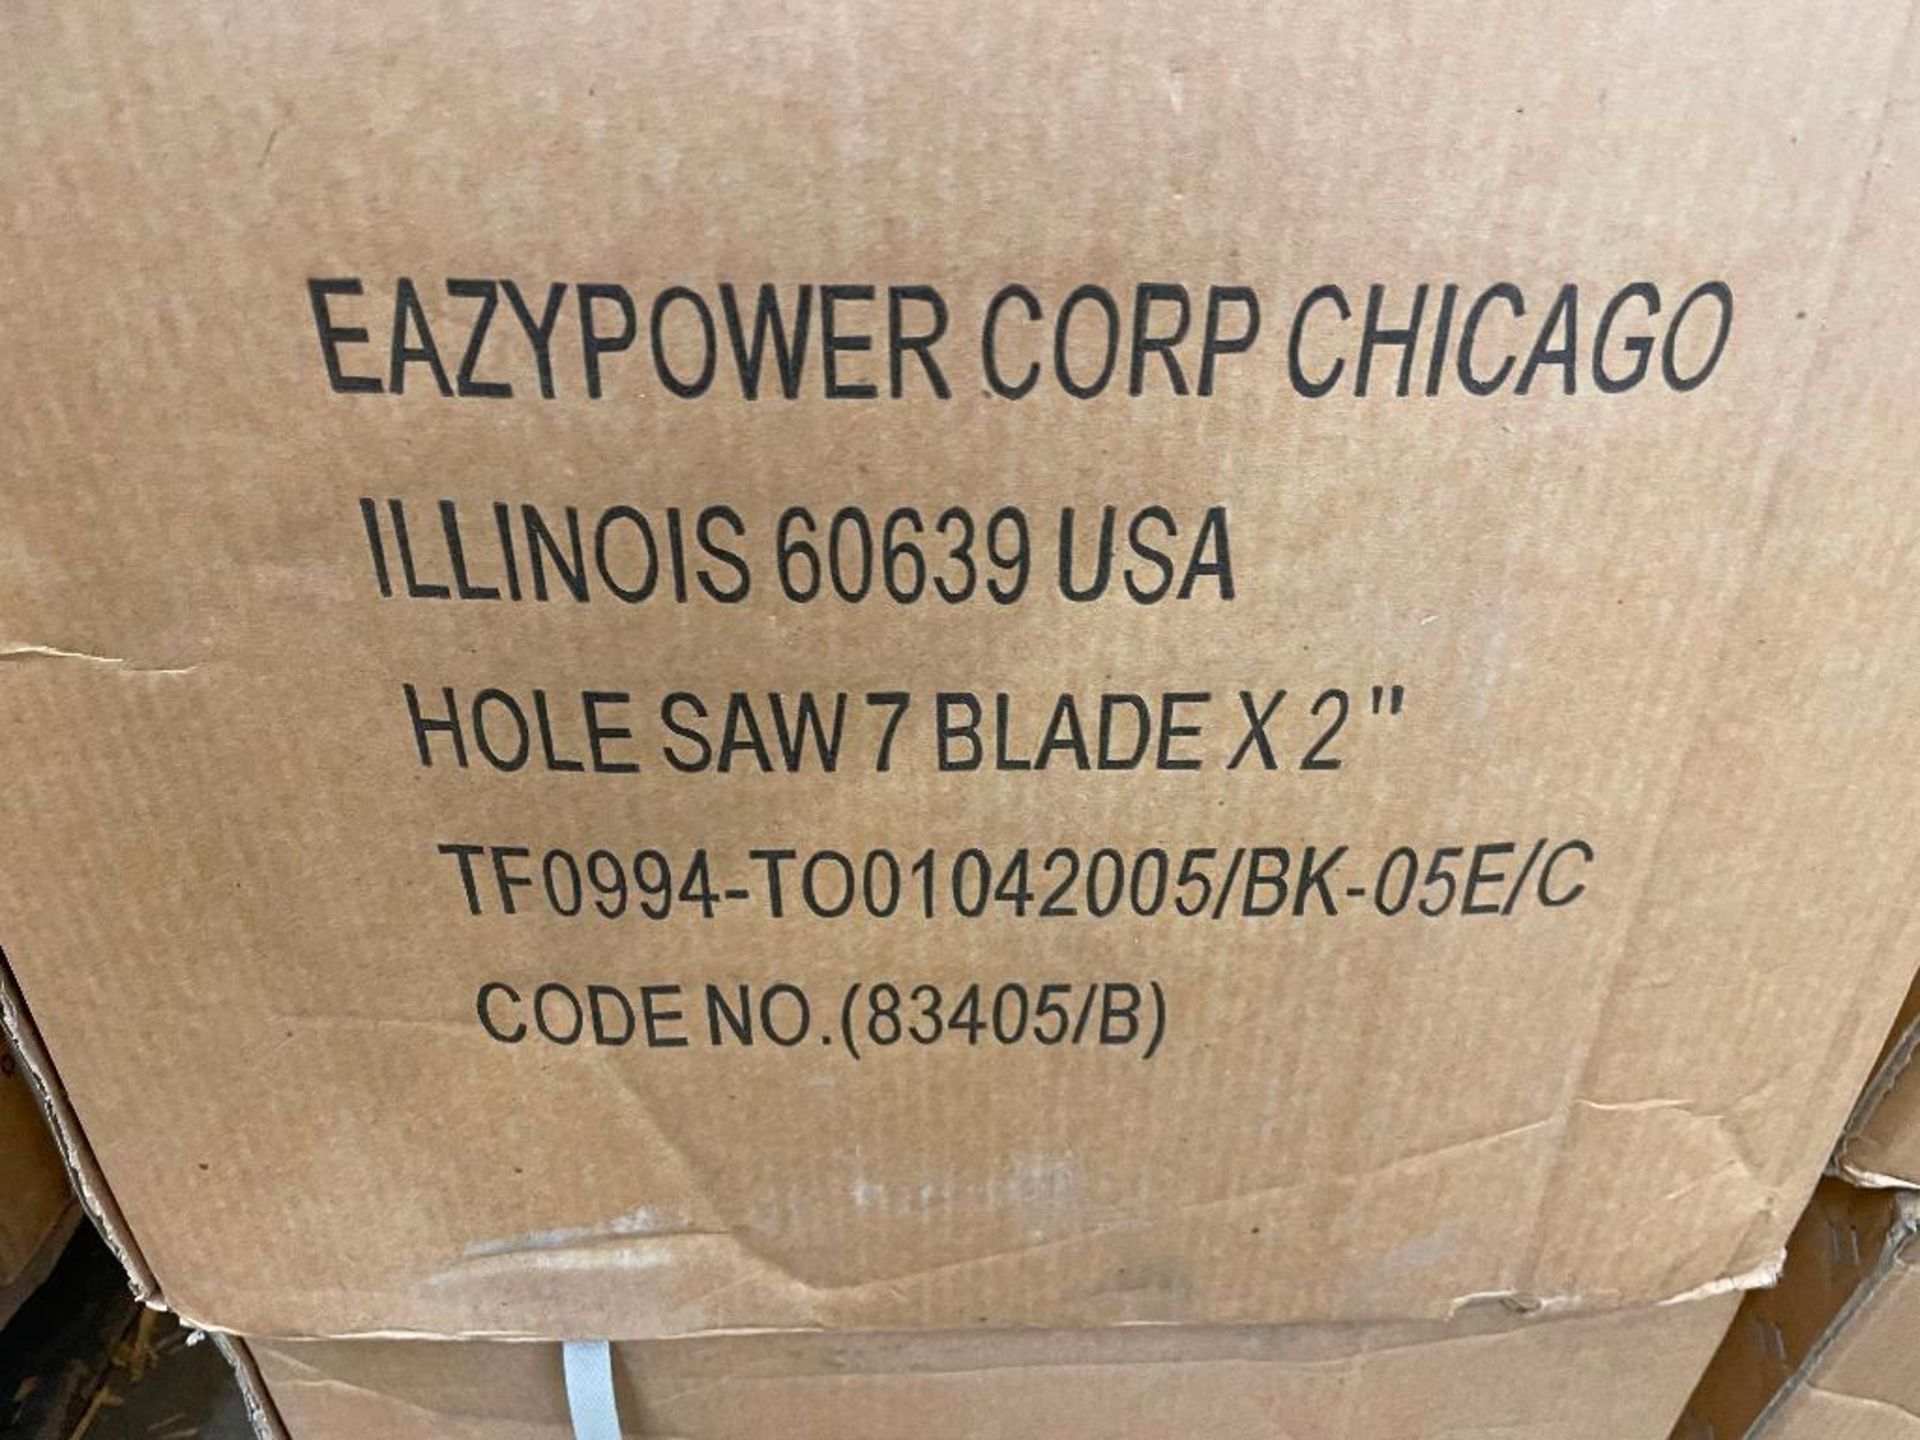 DESCRIPTION: (2) CASES OF HOLE SAW 7 BLADE 2" 50 UNITS PER CASE. 100 UNITS TOTAL BRAND / MODEL: EAZY - Image 5 of 6